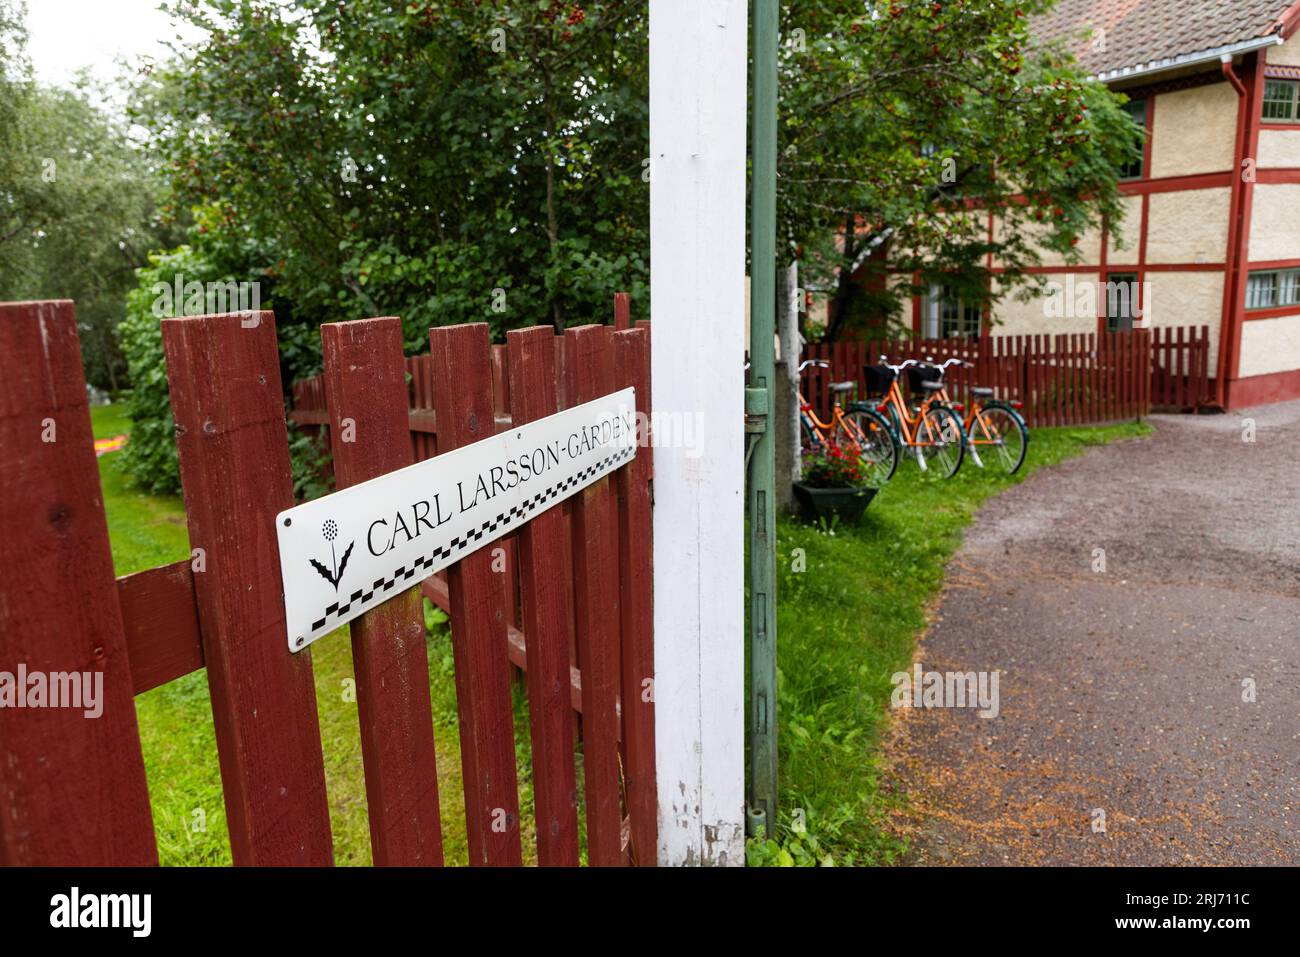 The Carl Larsson house in Sundborn, Dalarna County, Sweden. Sundborn is a locality situated in Falun Municipality, Dalarna County. The most famous resident was the painter Carl Larsson and his house (Little Hyttnäs) in Sundborn is a popular tourist attraction. Stock Photo